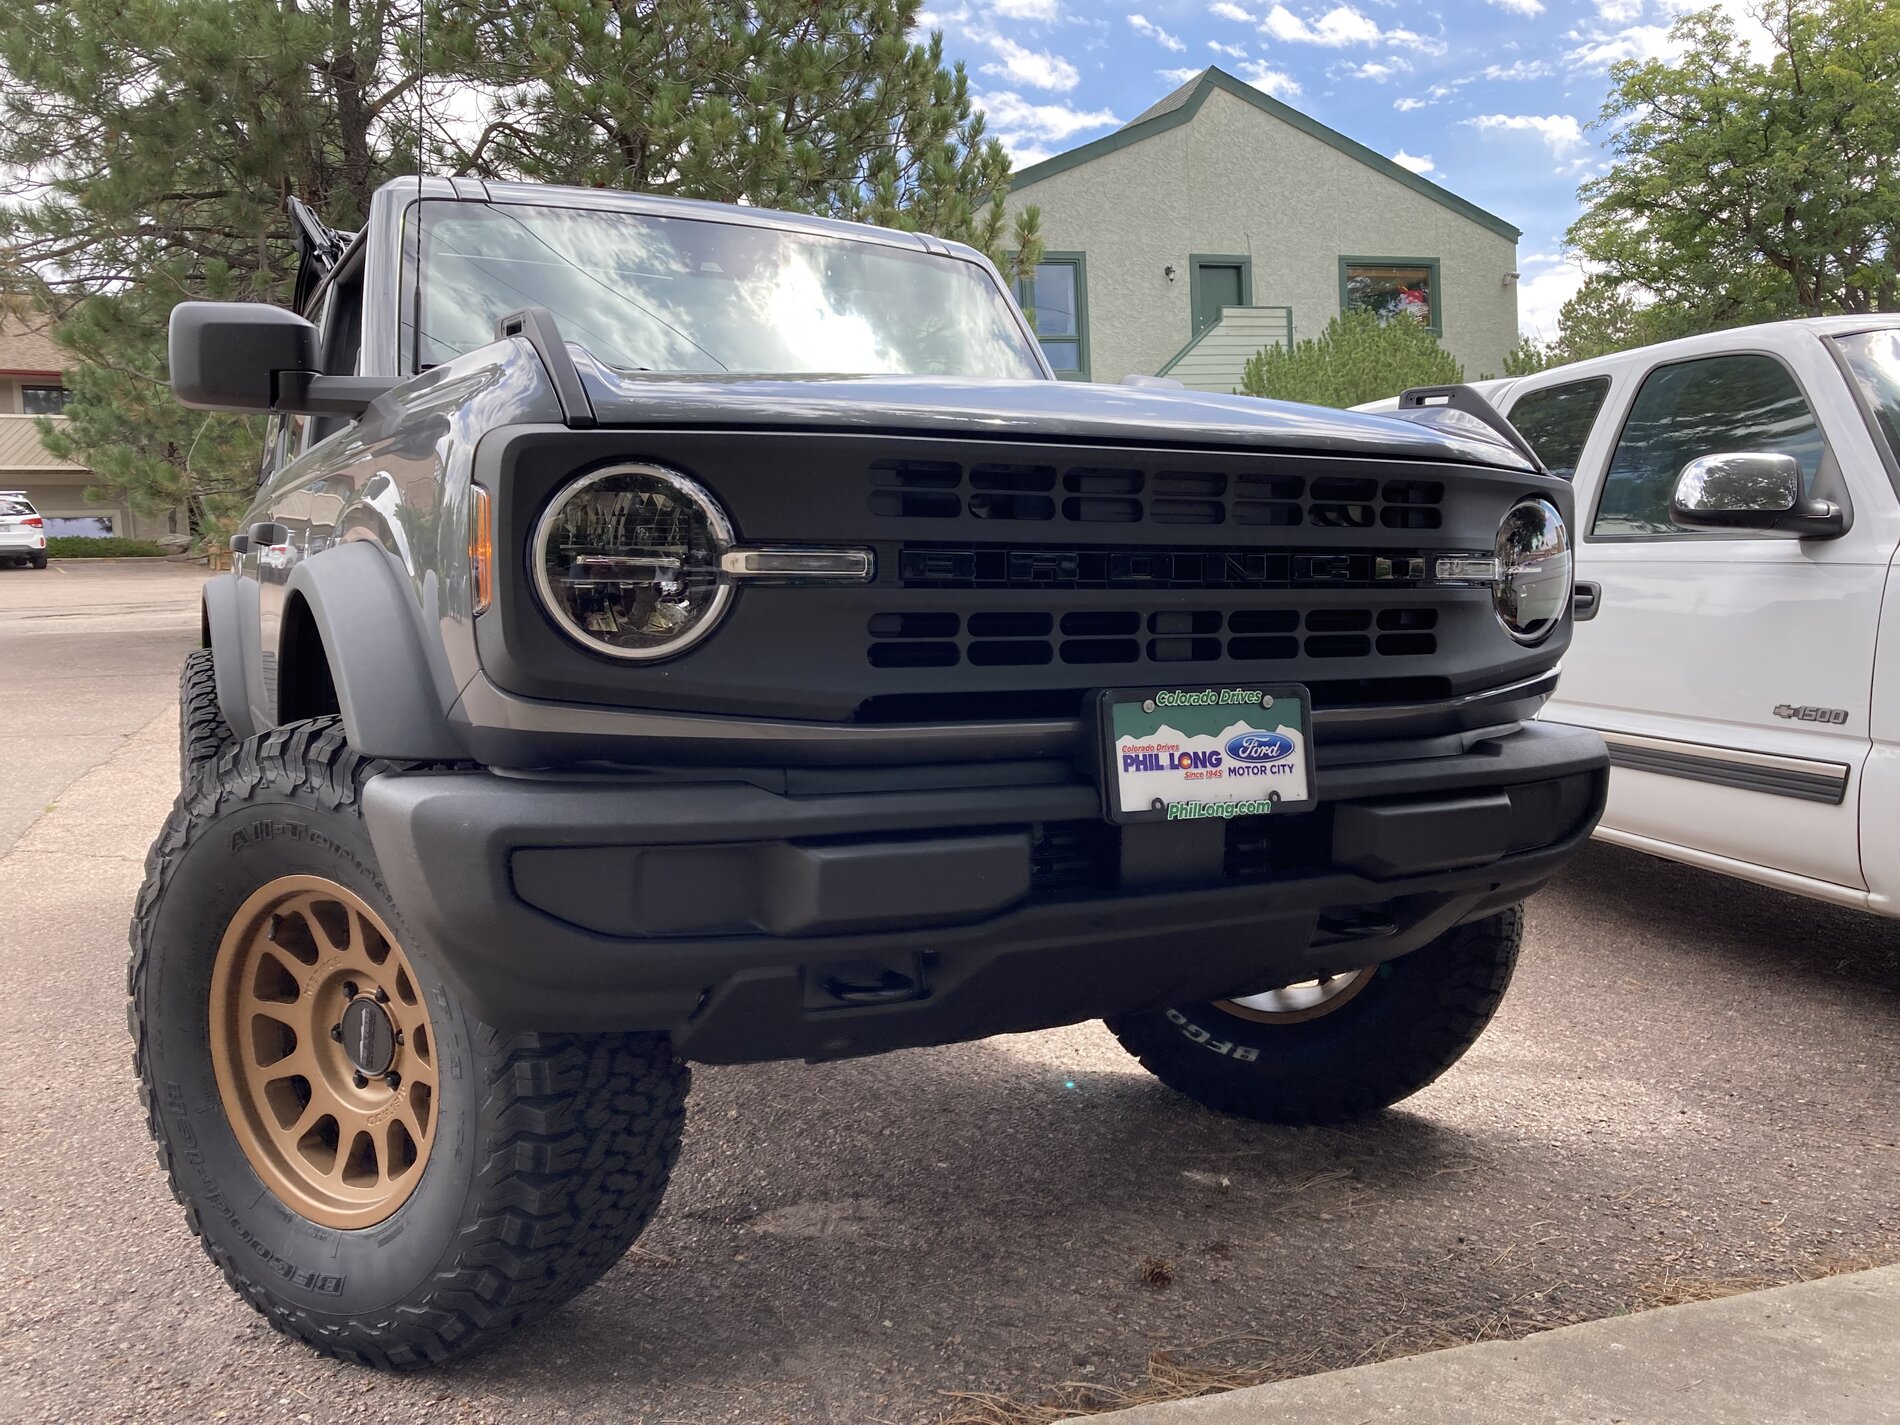 Ford Bronco Base Bronco Shawty Build Featuring 35’s by Hypebeast Dad 9d559847-7b4f-4815-acd0-d3c7d1fec350-jpe